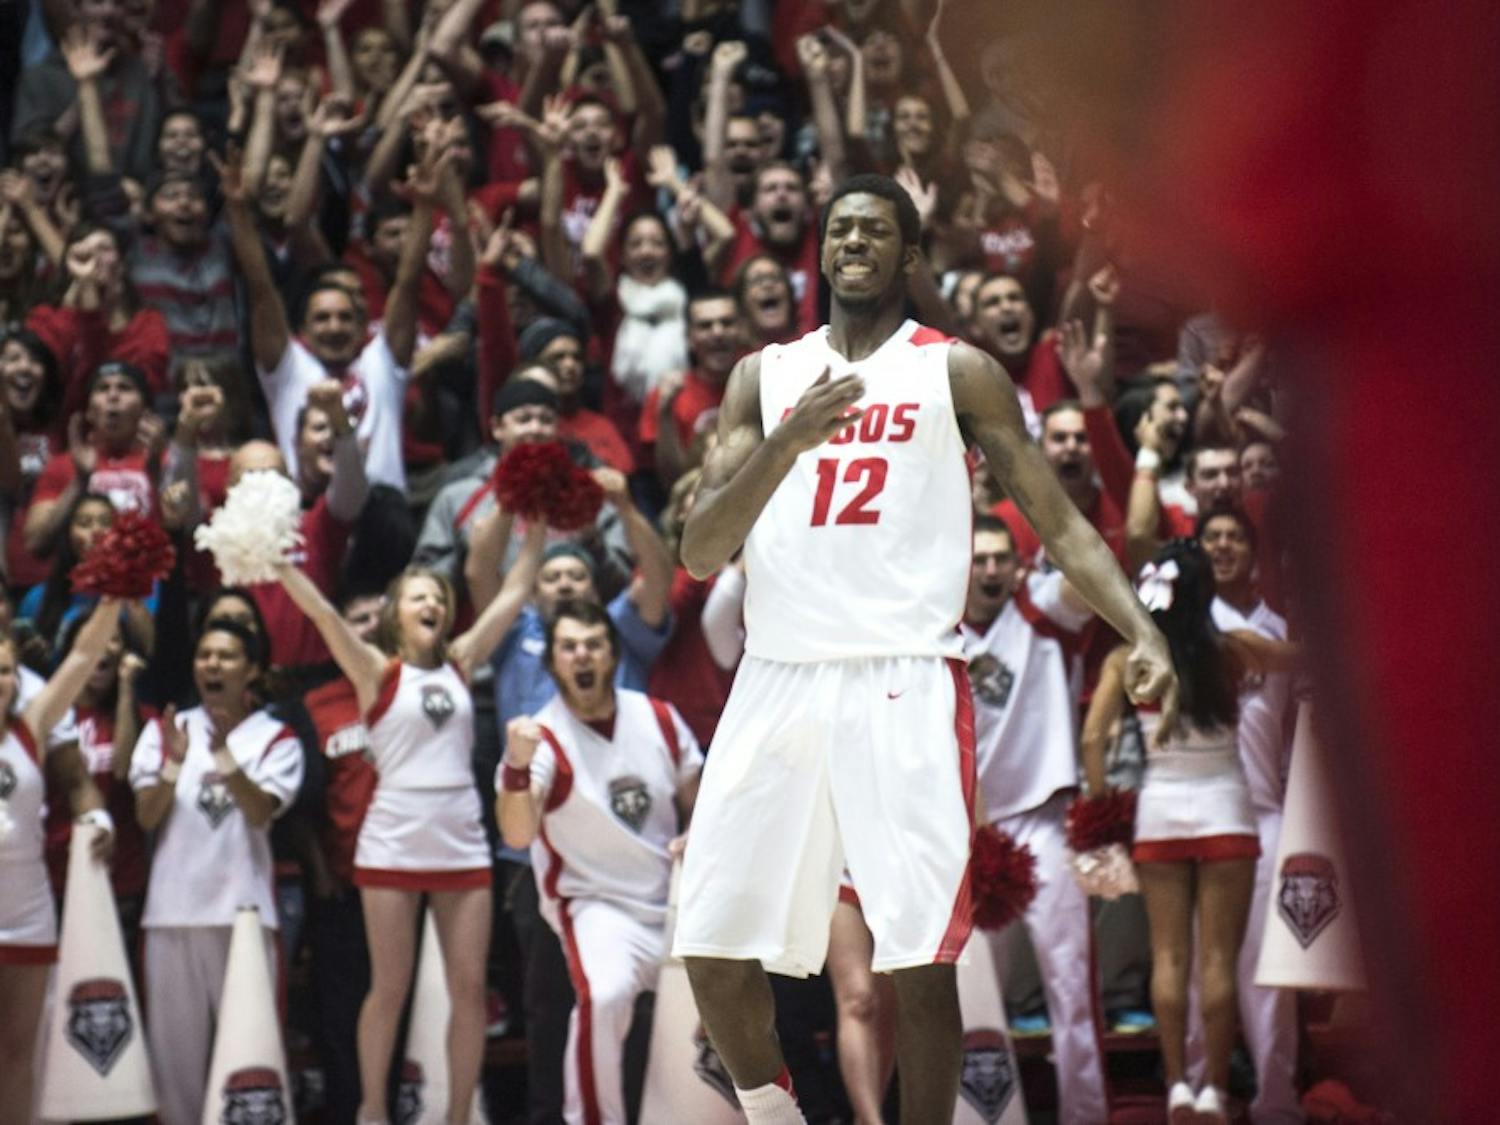 New Mexico forward Devon Williams celebrates after making a 3-pointer at the end of the first half during the Jan. 3 game against Colorado State at WisePies Arena.